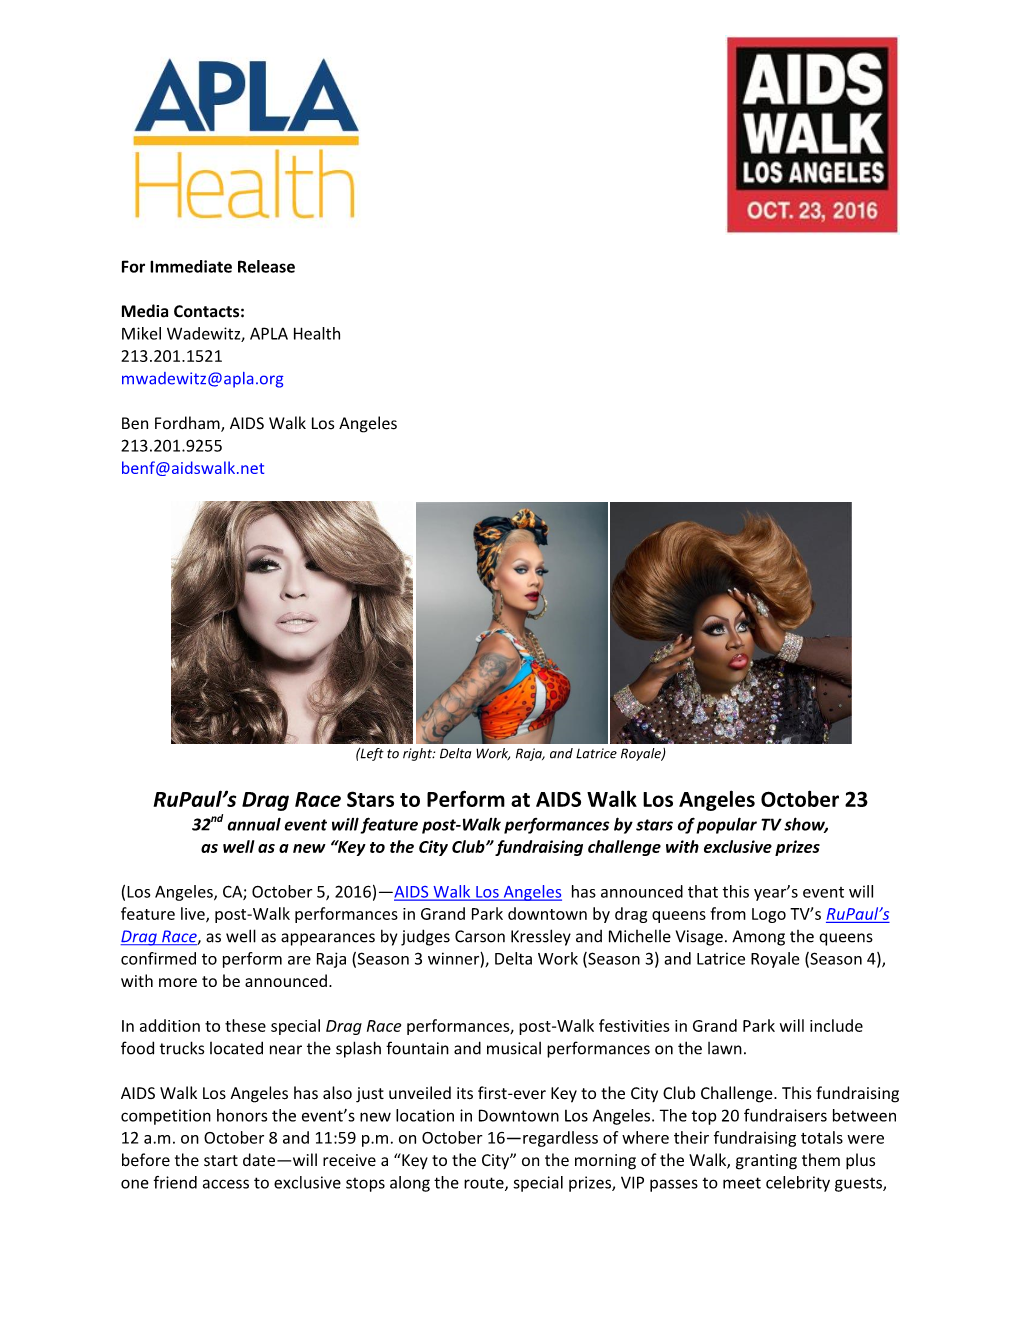 Rupaul's Drag Race Stars to Perform at AIDS Walk Los Angeles October 23